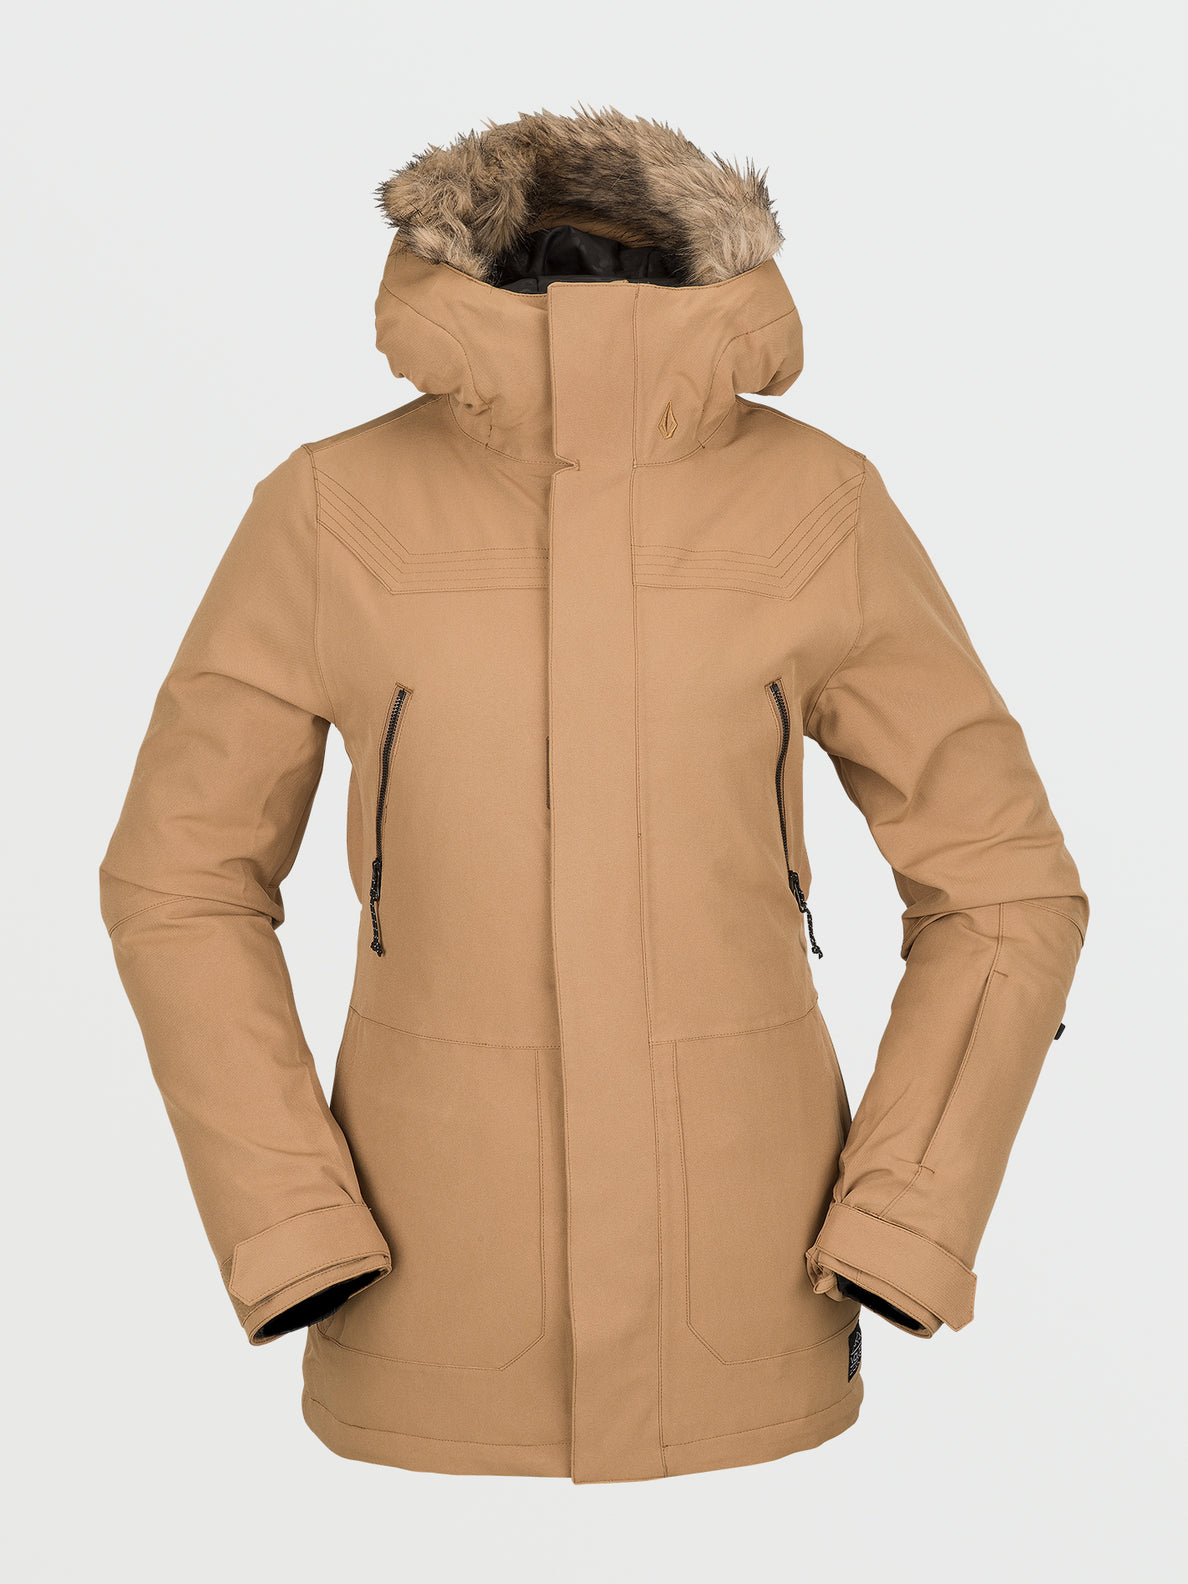 Women's Shadow Insulated Jacket